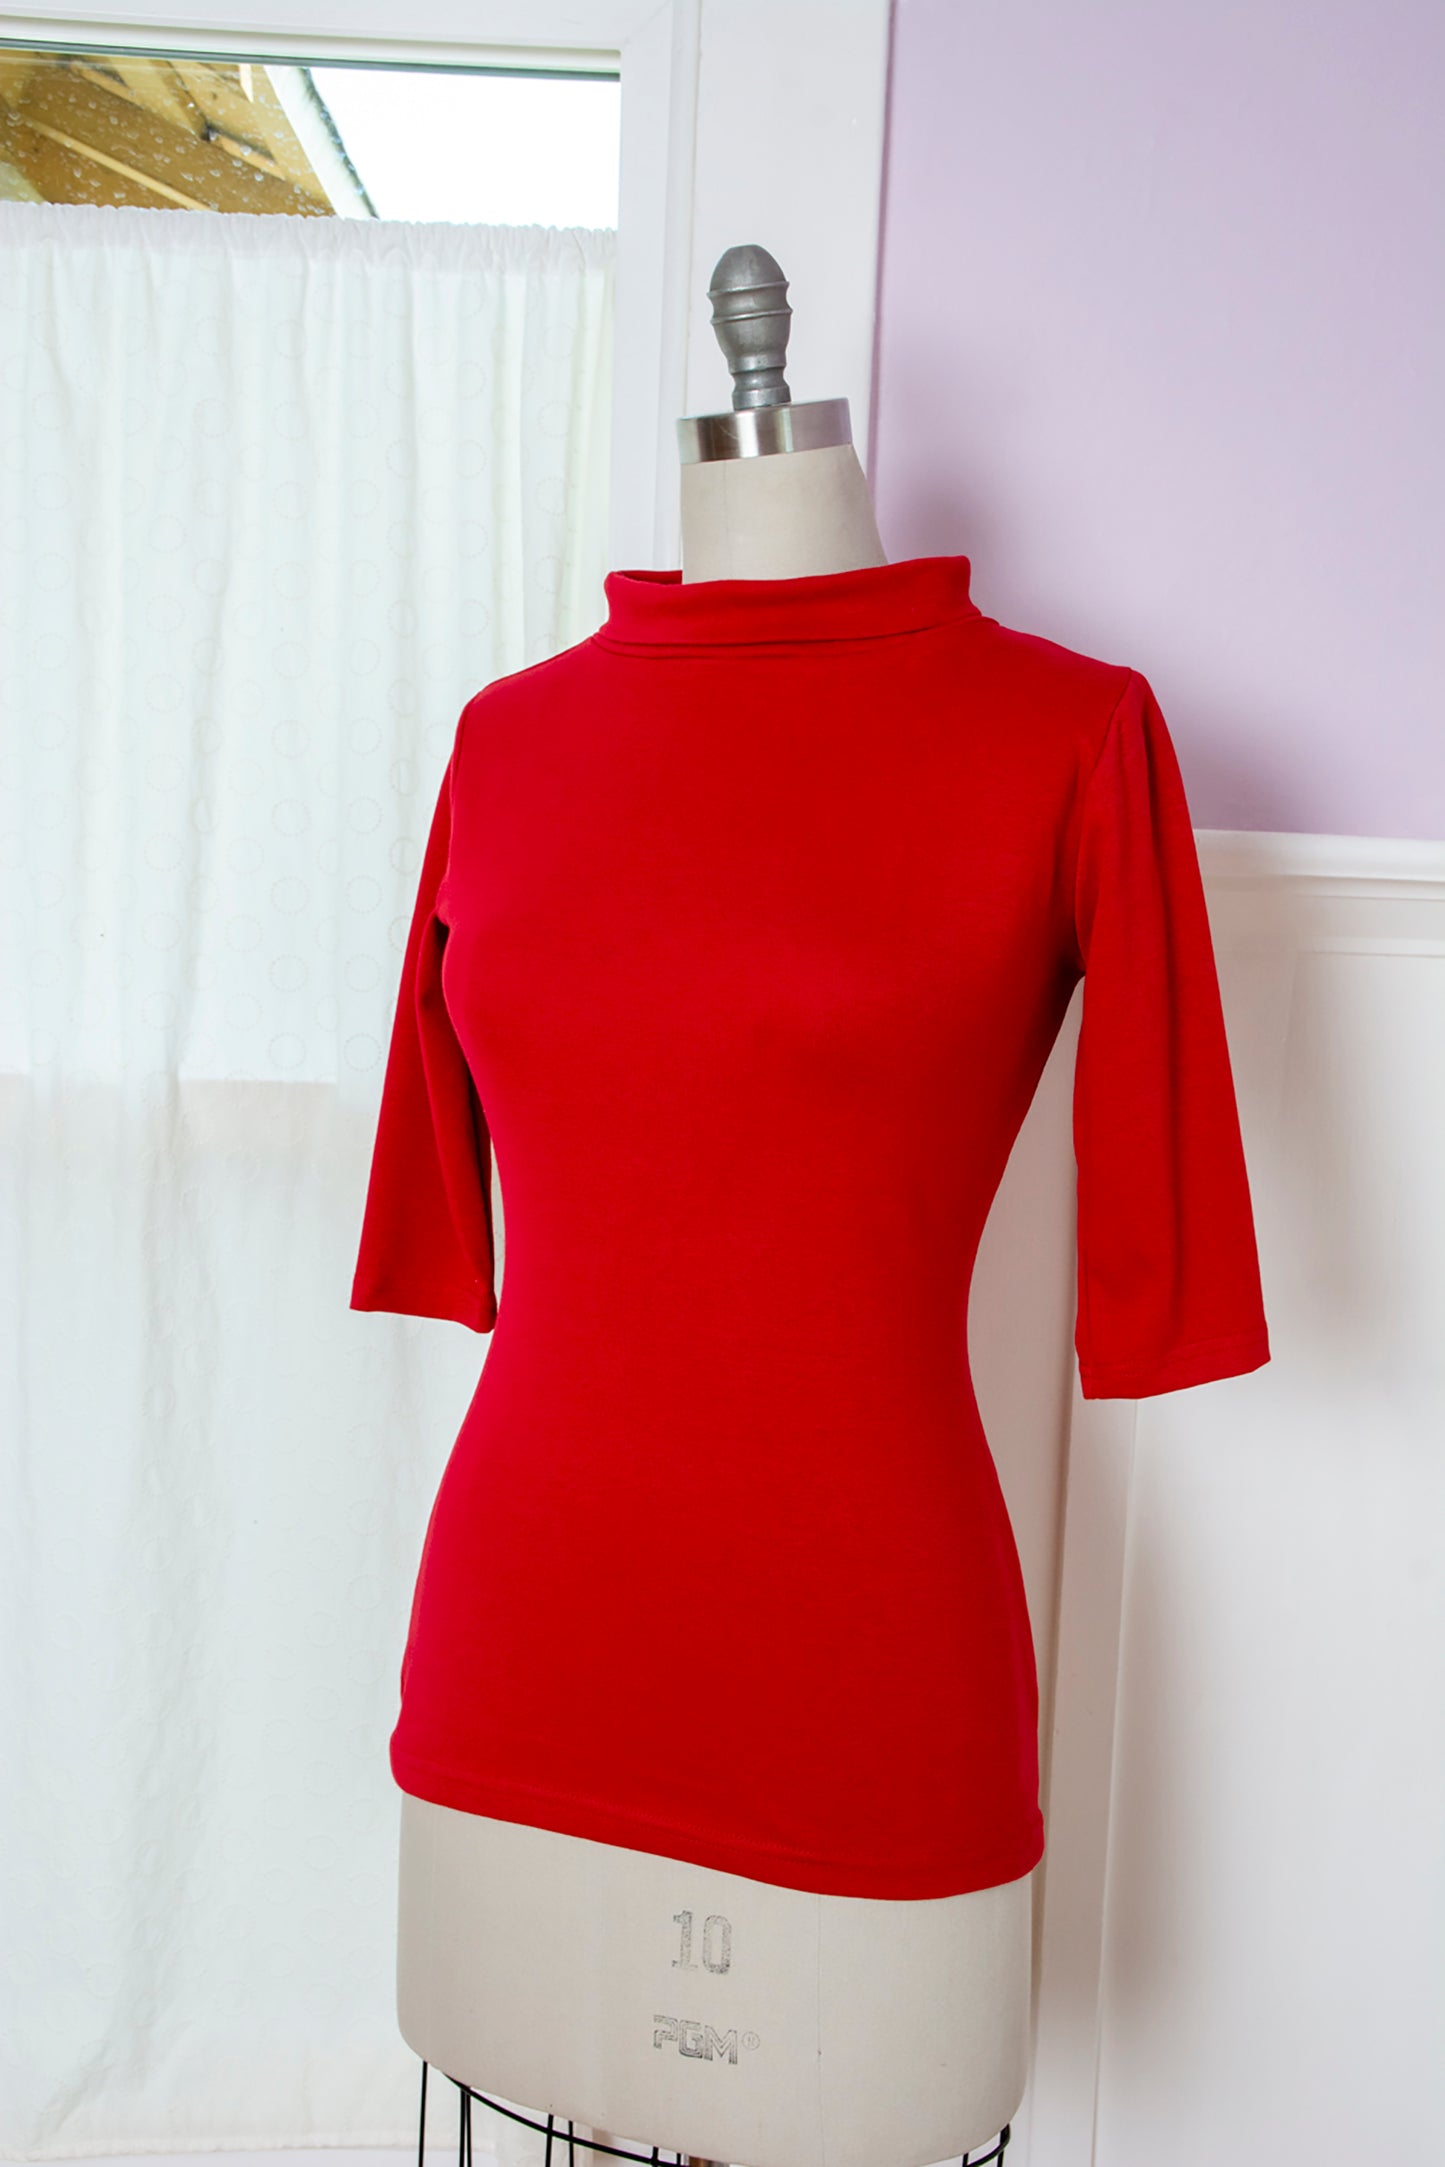 Spy Top - Red